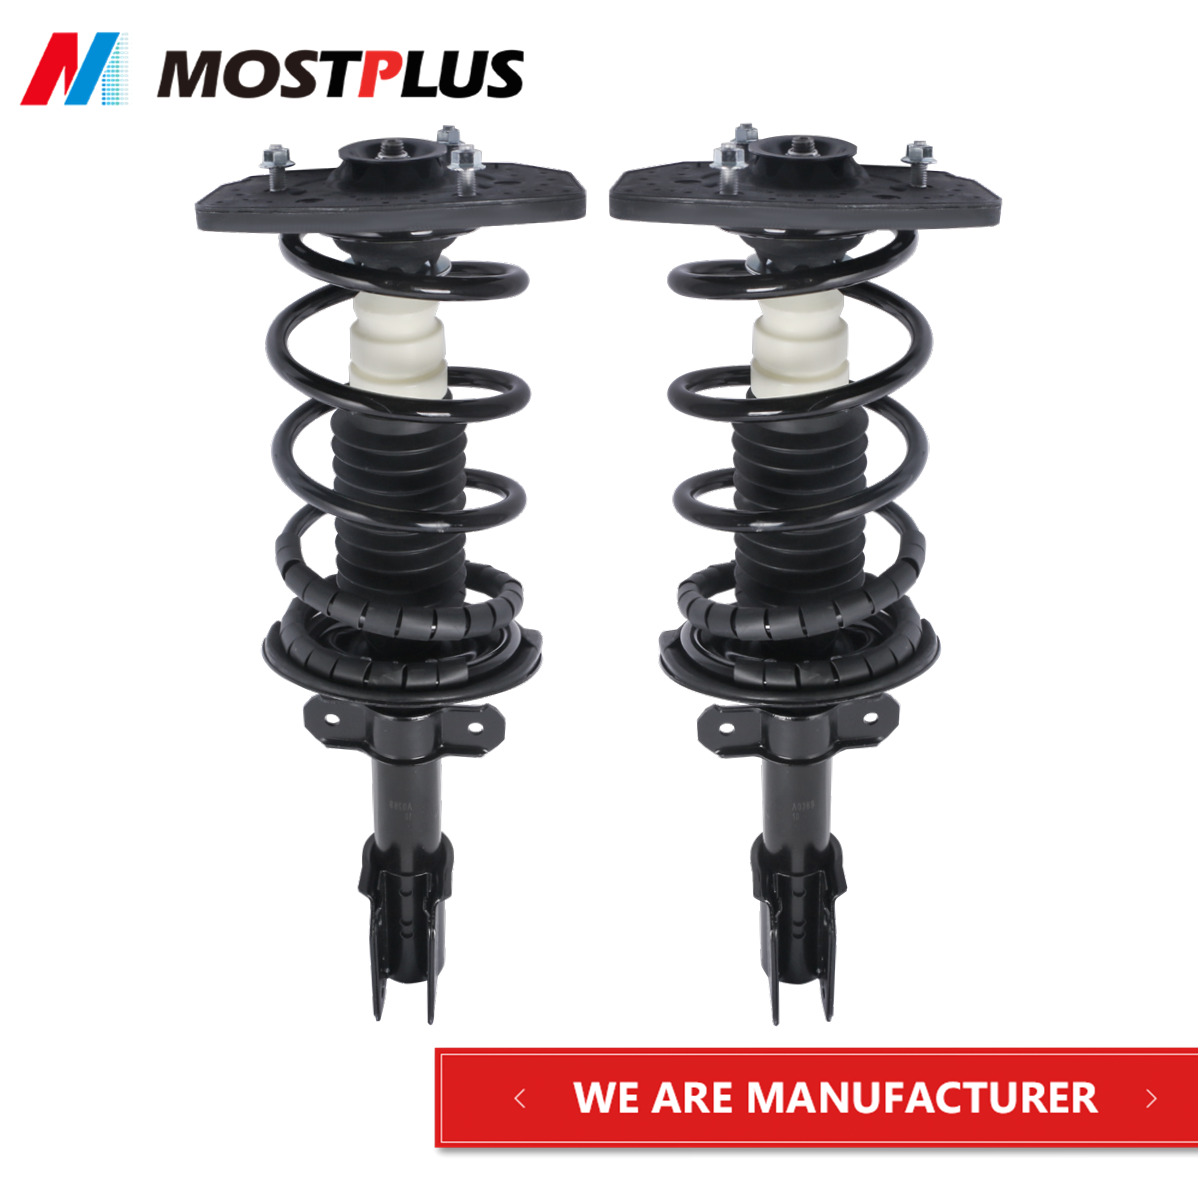 Pair Rear Struts Assembly For 2000-2011 Chevy Impala 98-2002 Oldsmobile Intrigue